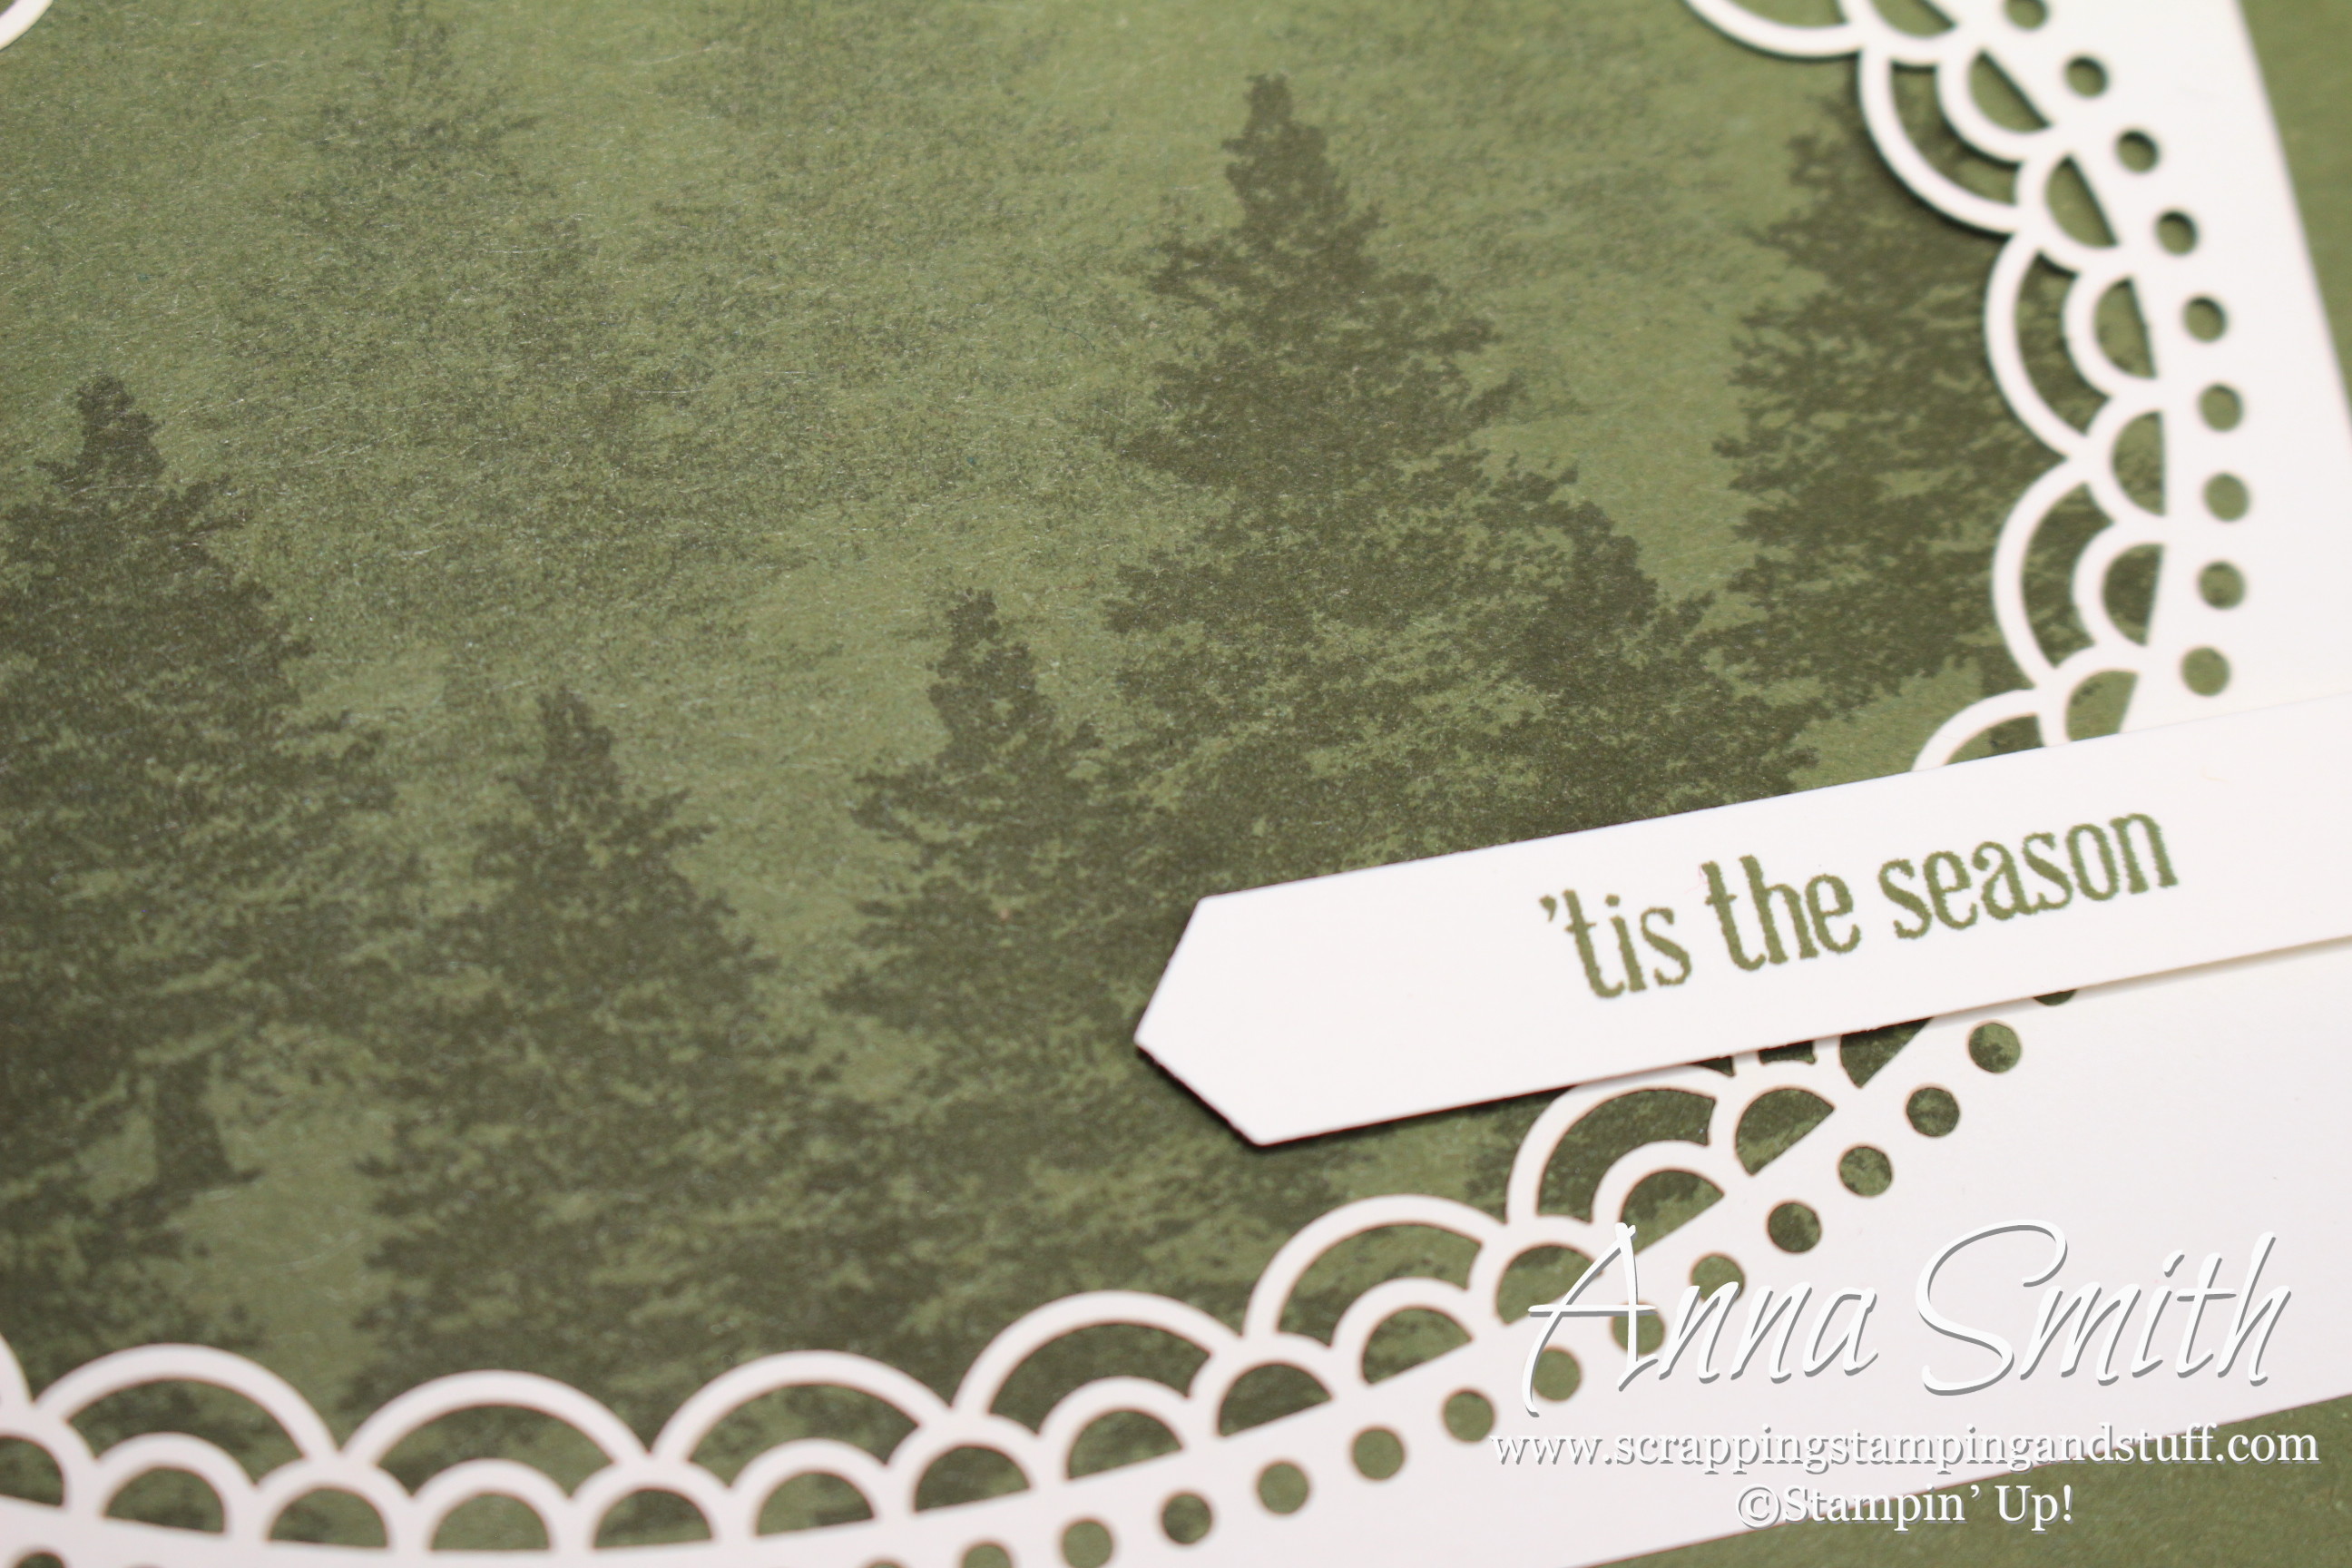 Stampin’ Up! Delightfully Detailed Christmas Card